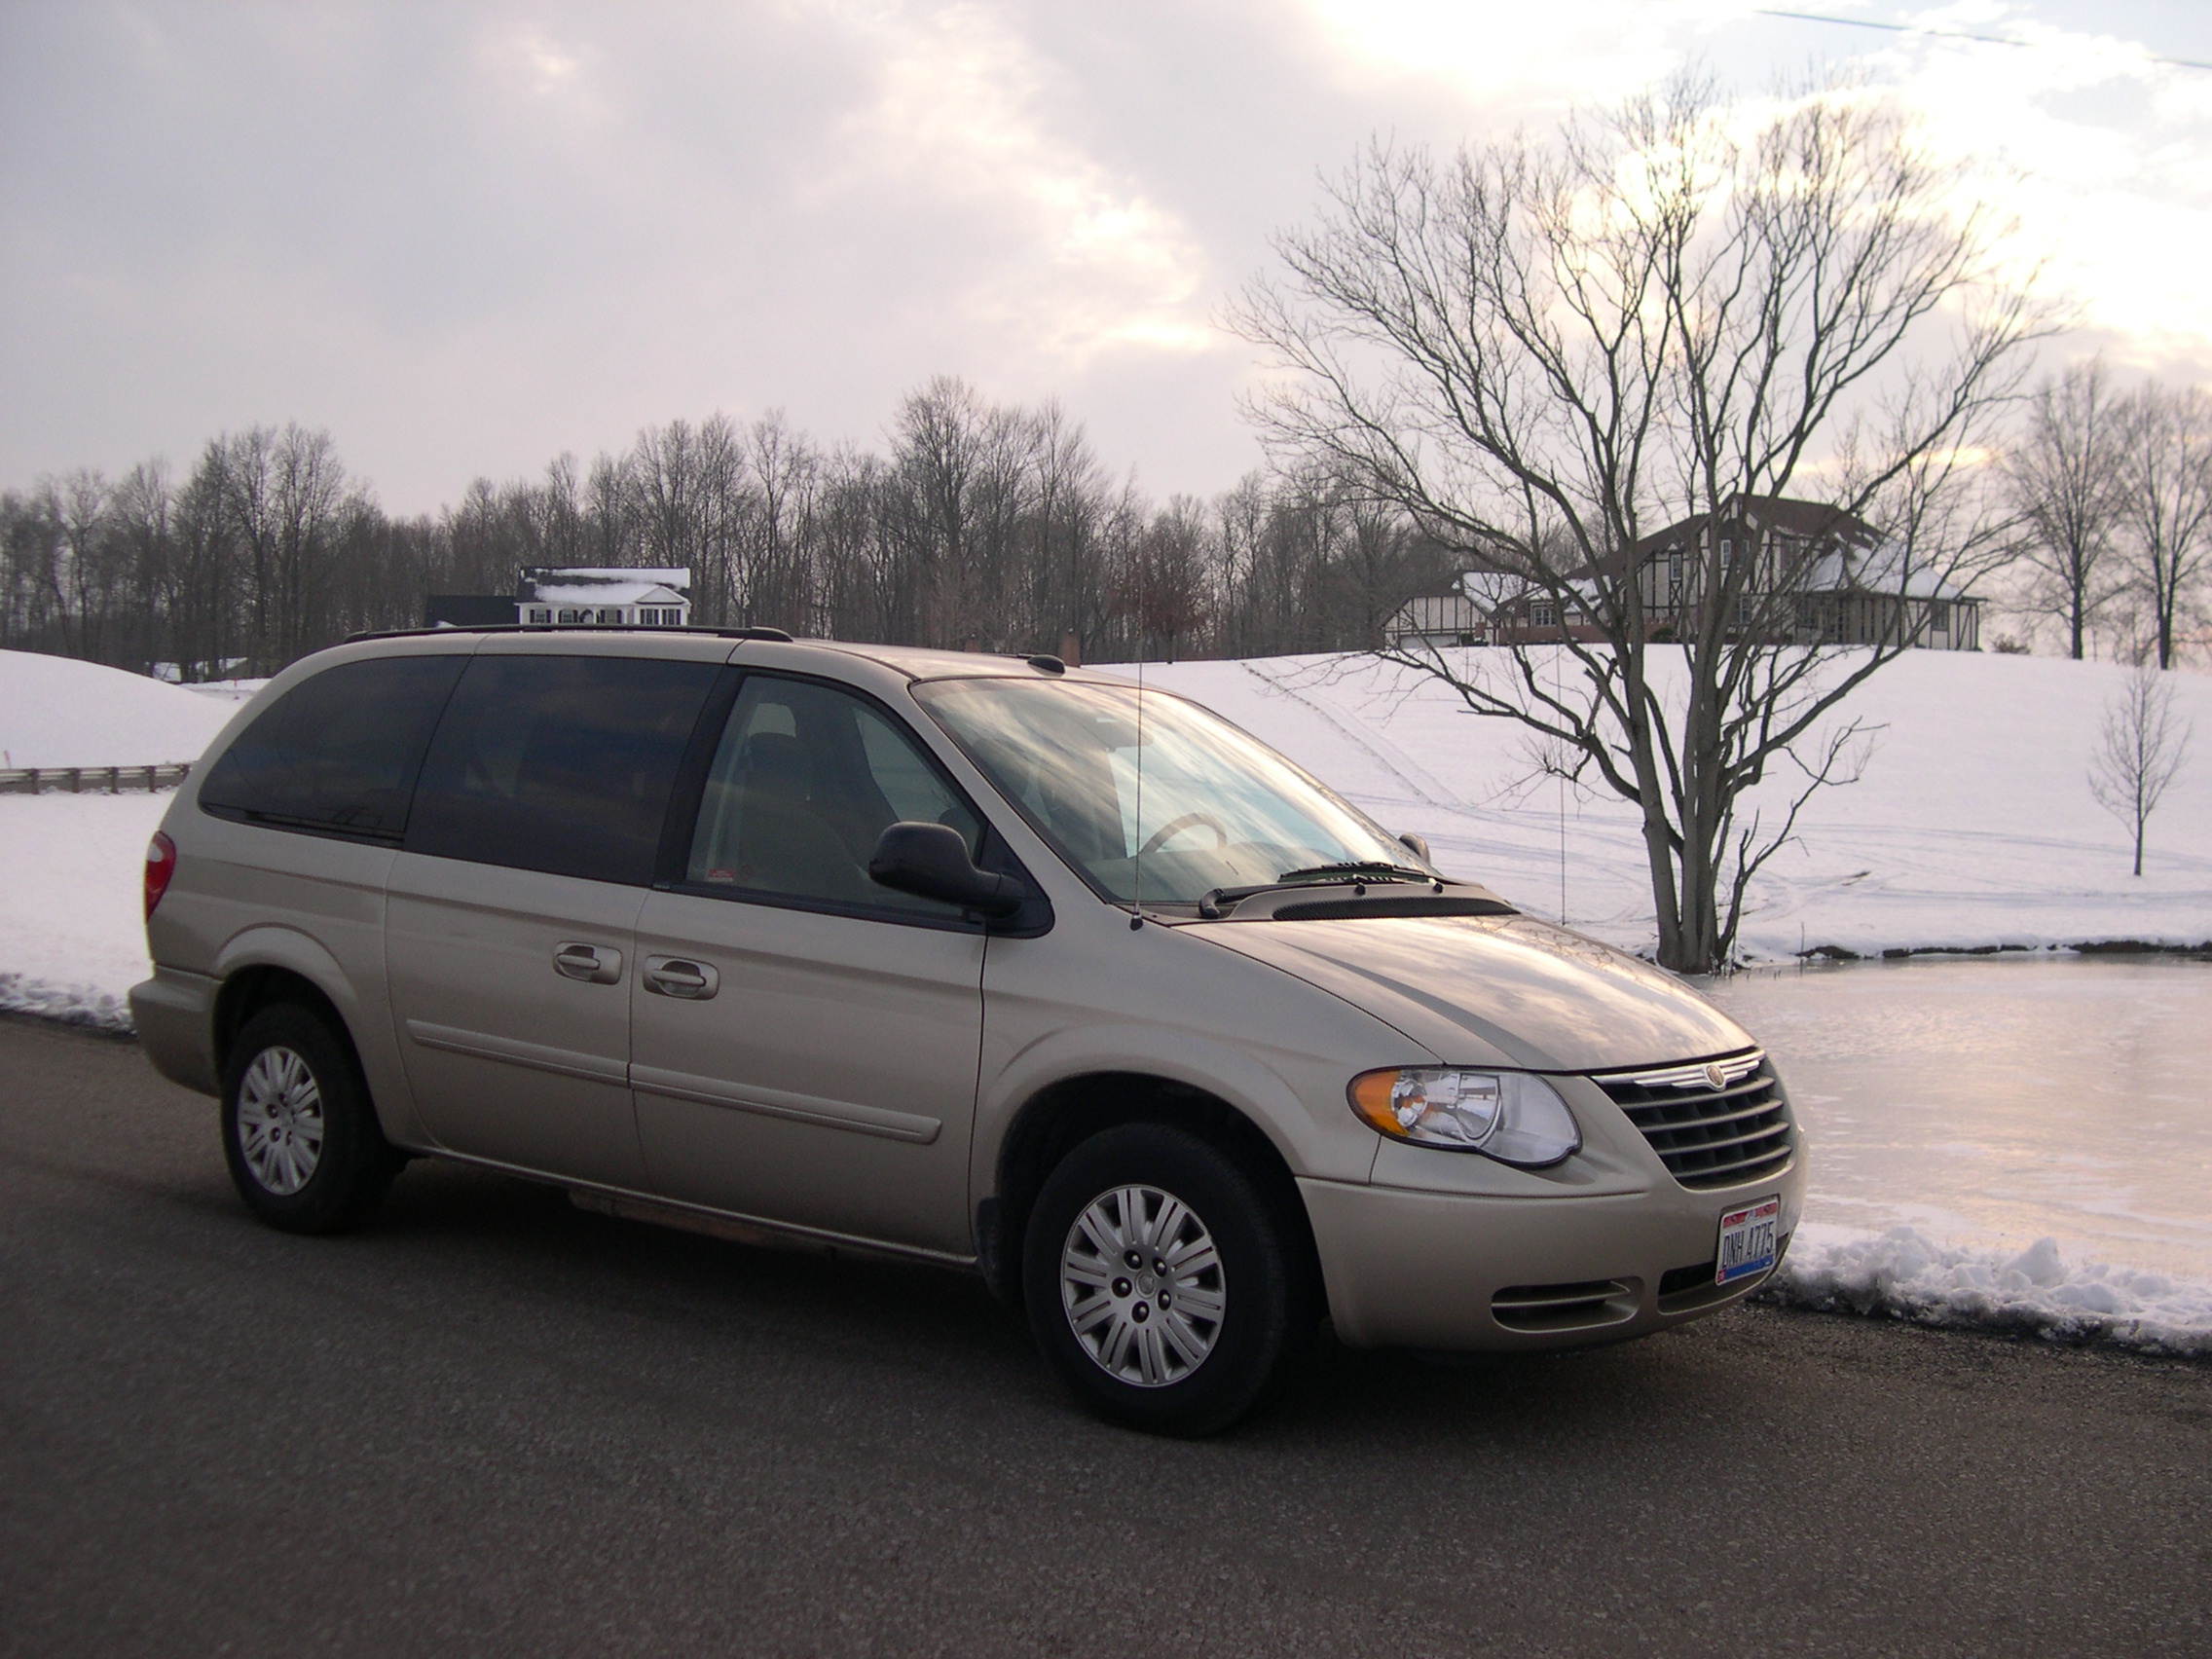 2005 chrysler town & country